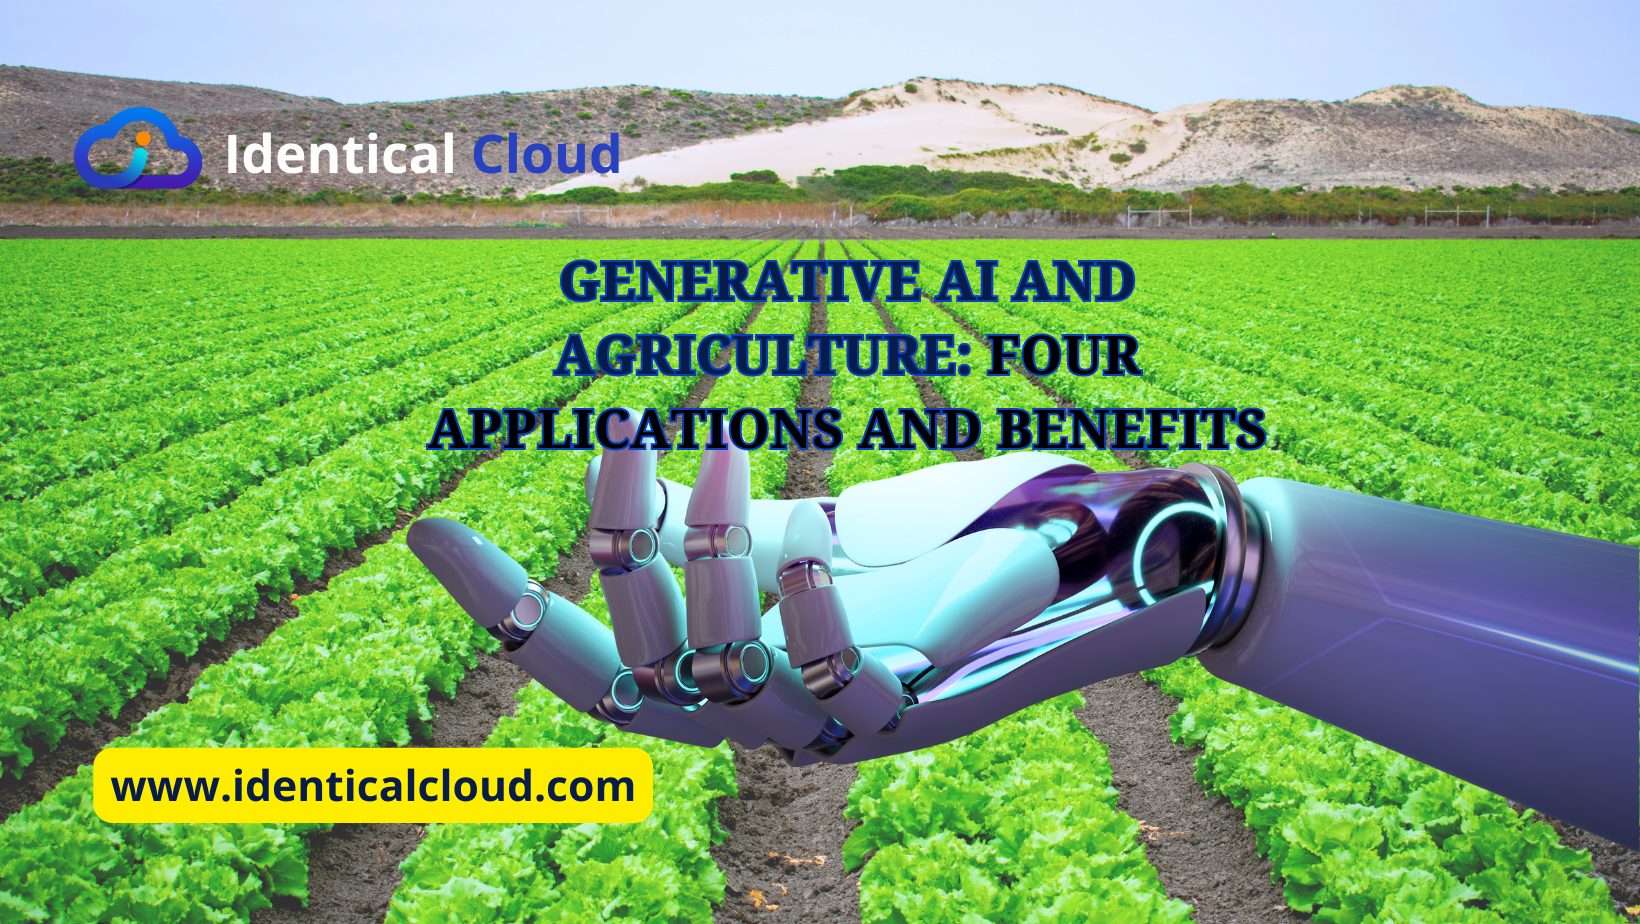 Generative AI and Agriculture: Four Applications and Benefits - identicalcloud.com